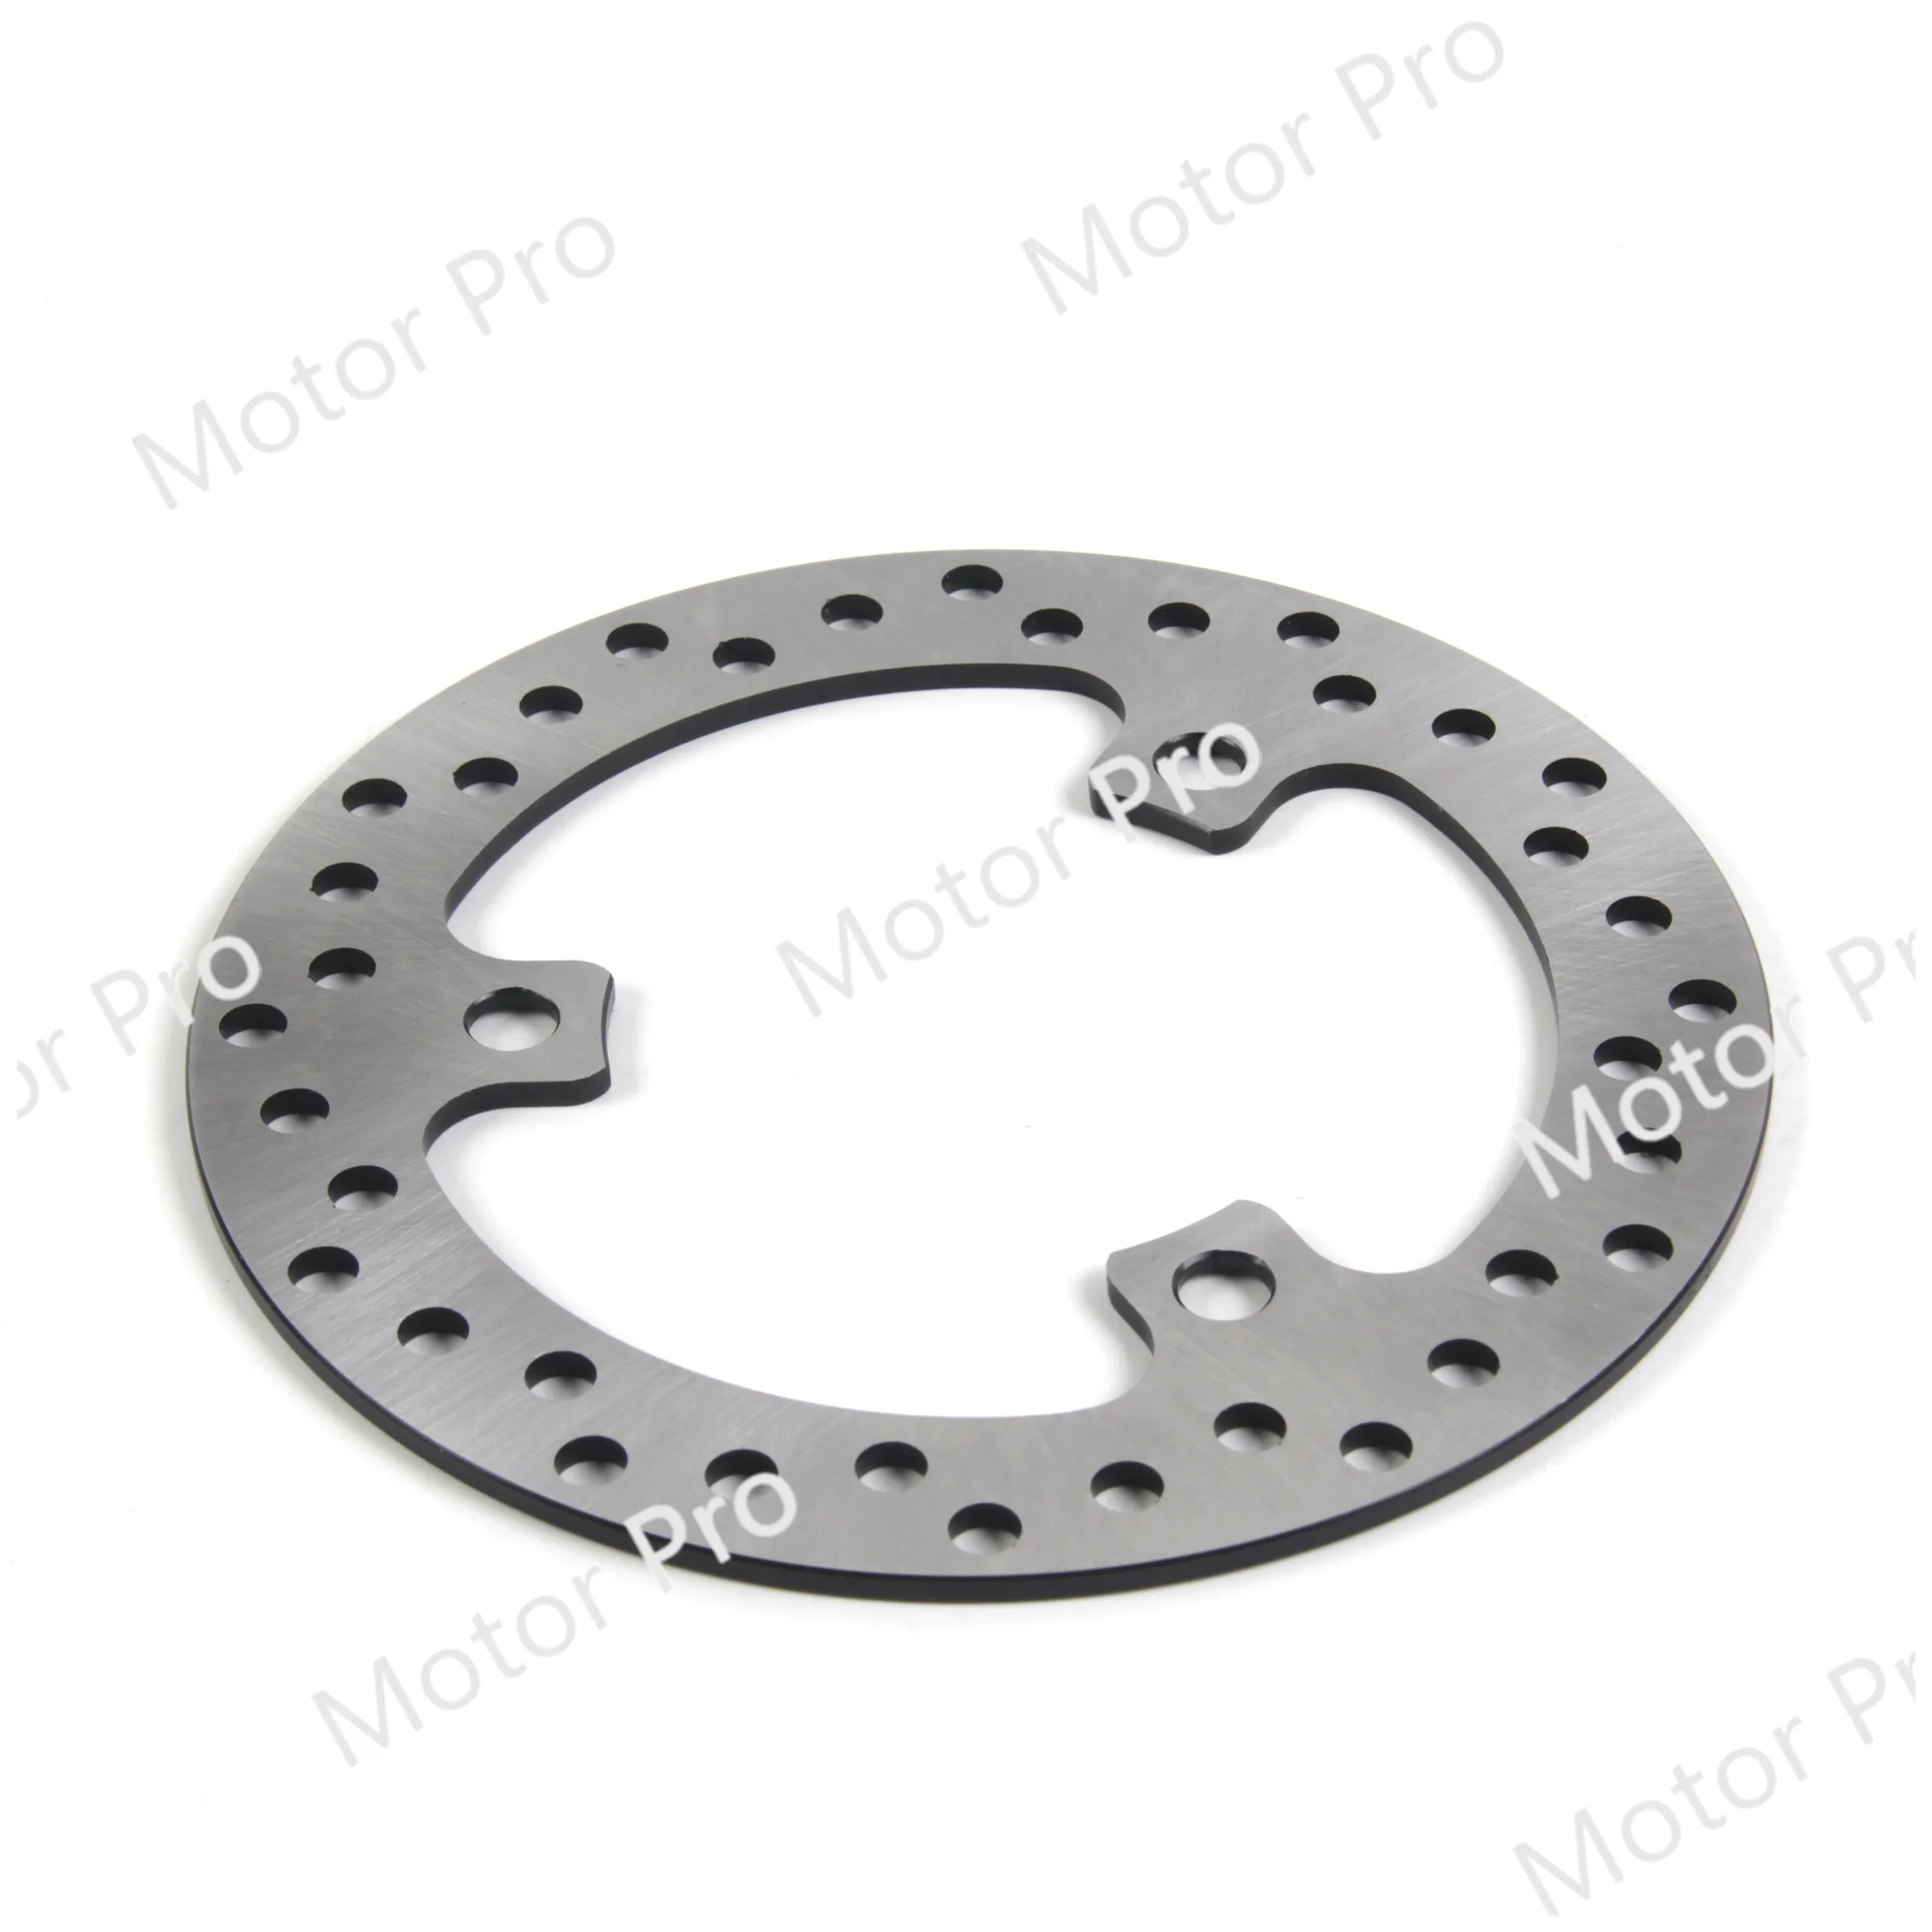 

For HONDA NSF R 250 2012 - 2022 Rear Brake Disc Rotor Disk NSF250R 2015 2016 2017 2018 2019 Motorcycle Replacement Accessories